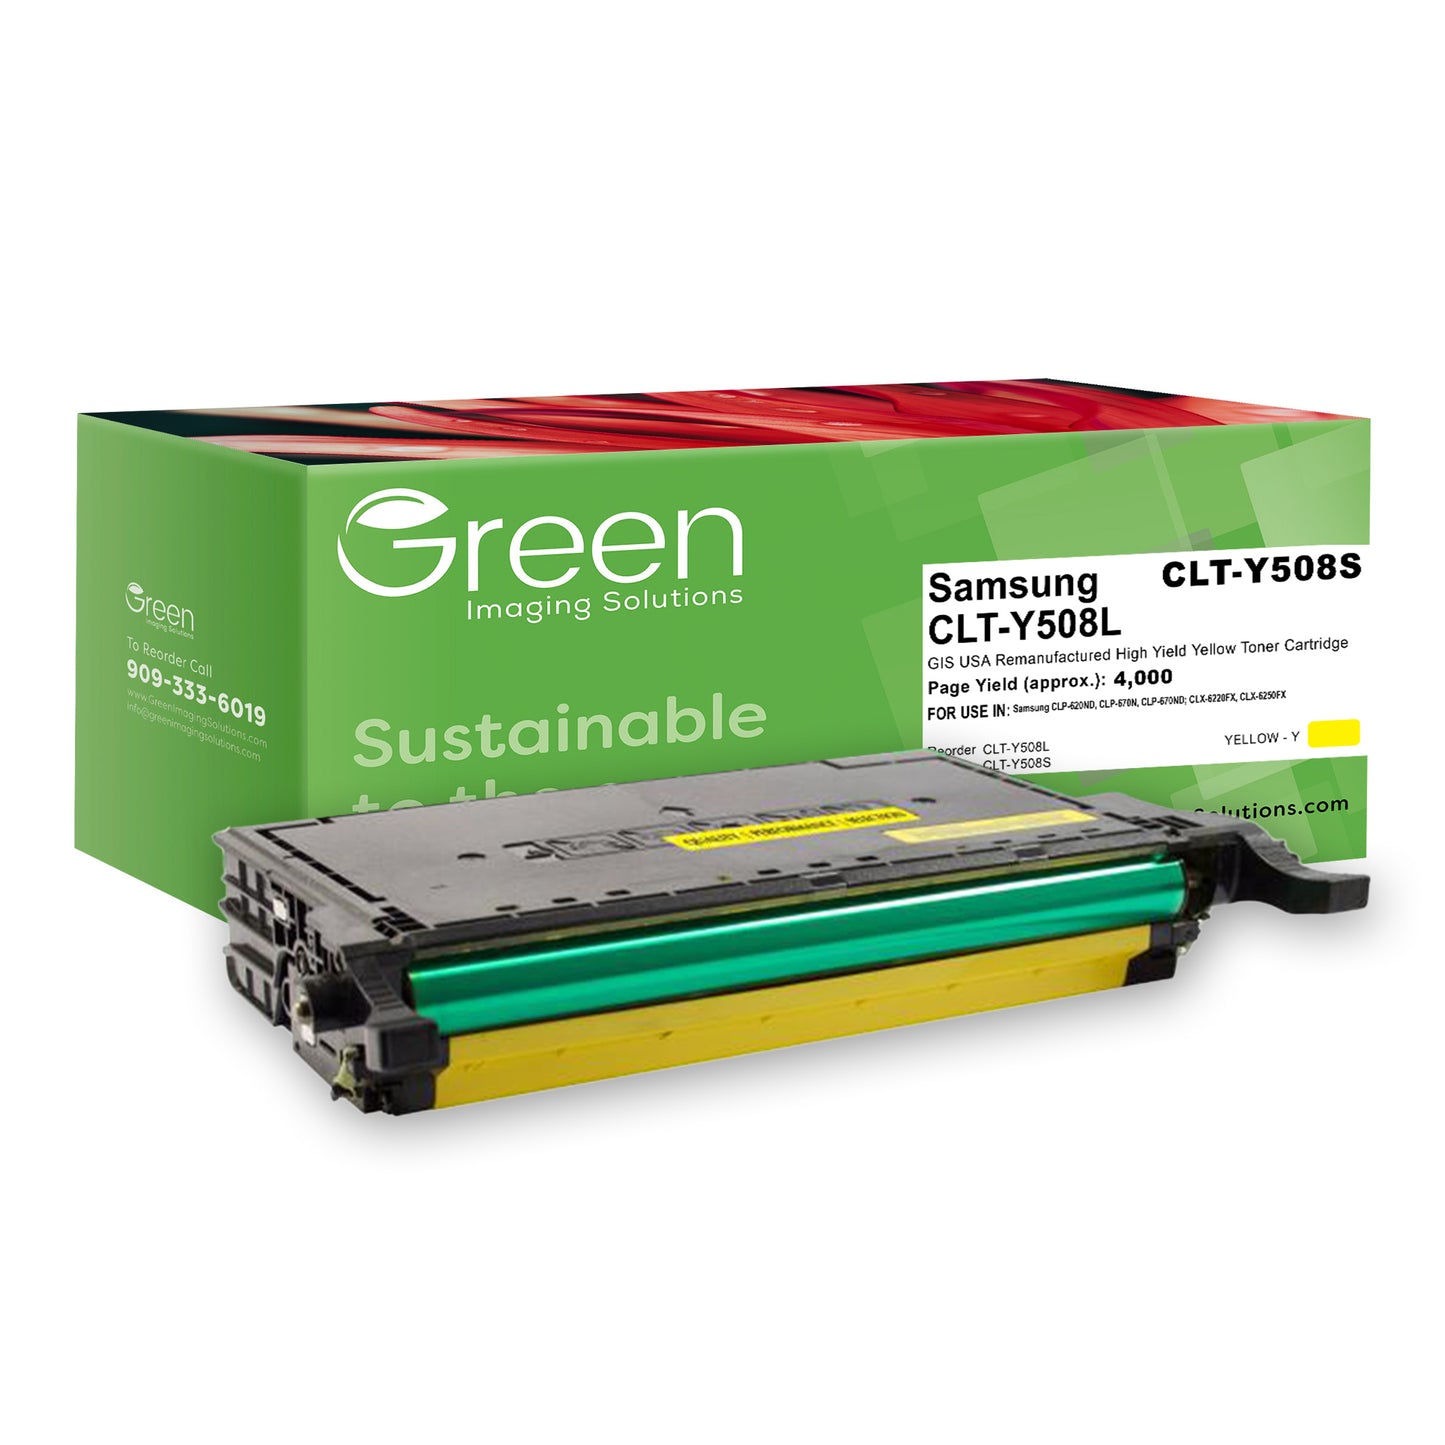 Green Imaging Solutions USA Remanufactured High Yield Yellow Toner Cartridge for Samsung CLT-Y508L/CLT-Y508S